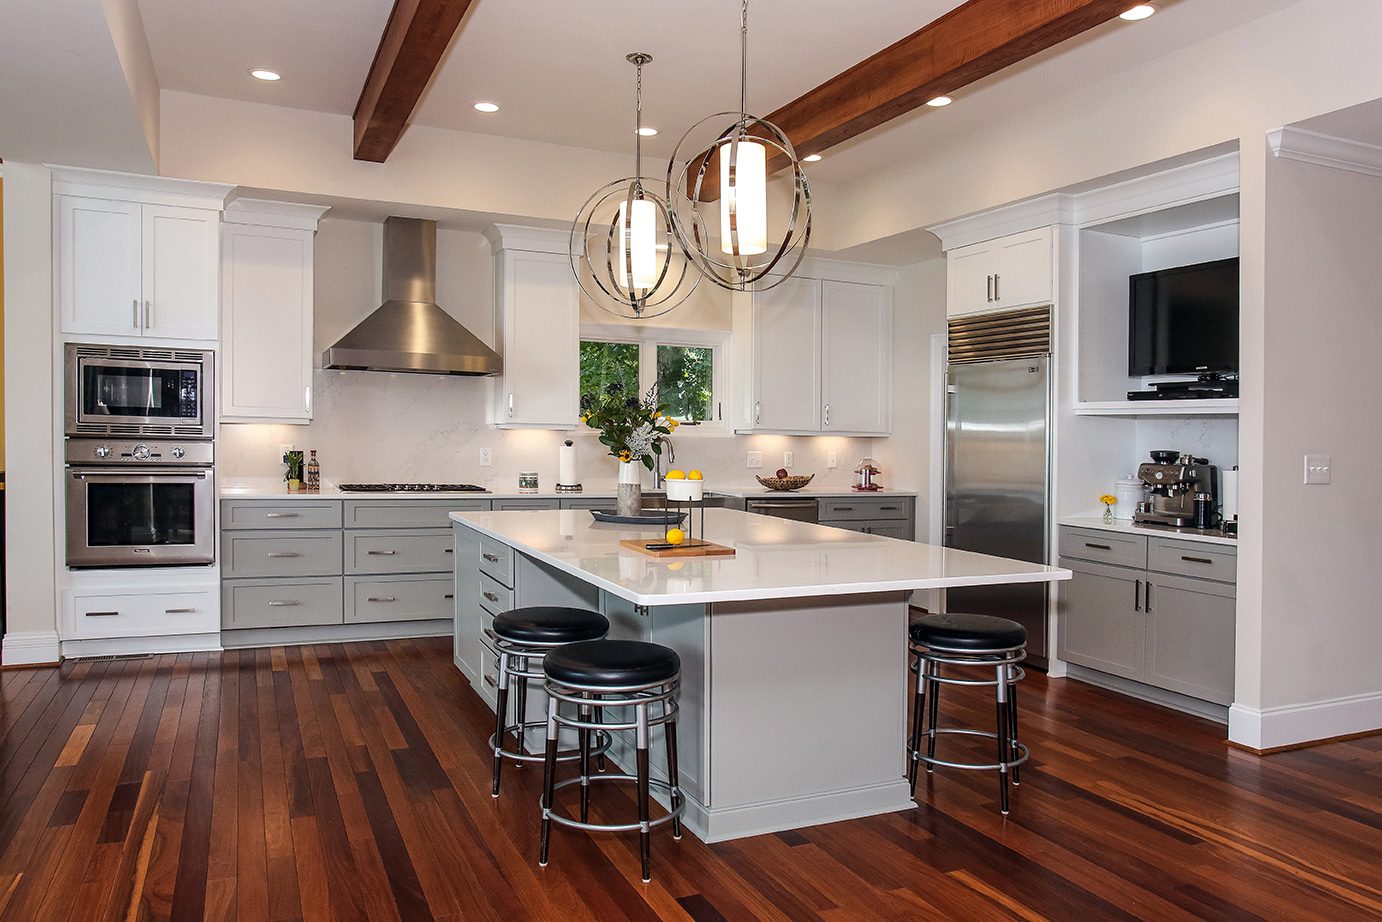 Modern kitchen with white shake style cabinets and island with white granite tops. Brown hard wood floor and exposed beam ceiling. The kitchen has stainless steel appliances and ornate light fixtures over the island and black and silver stools around it